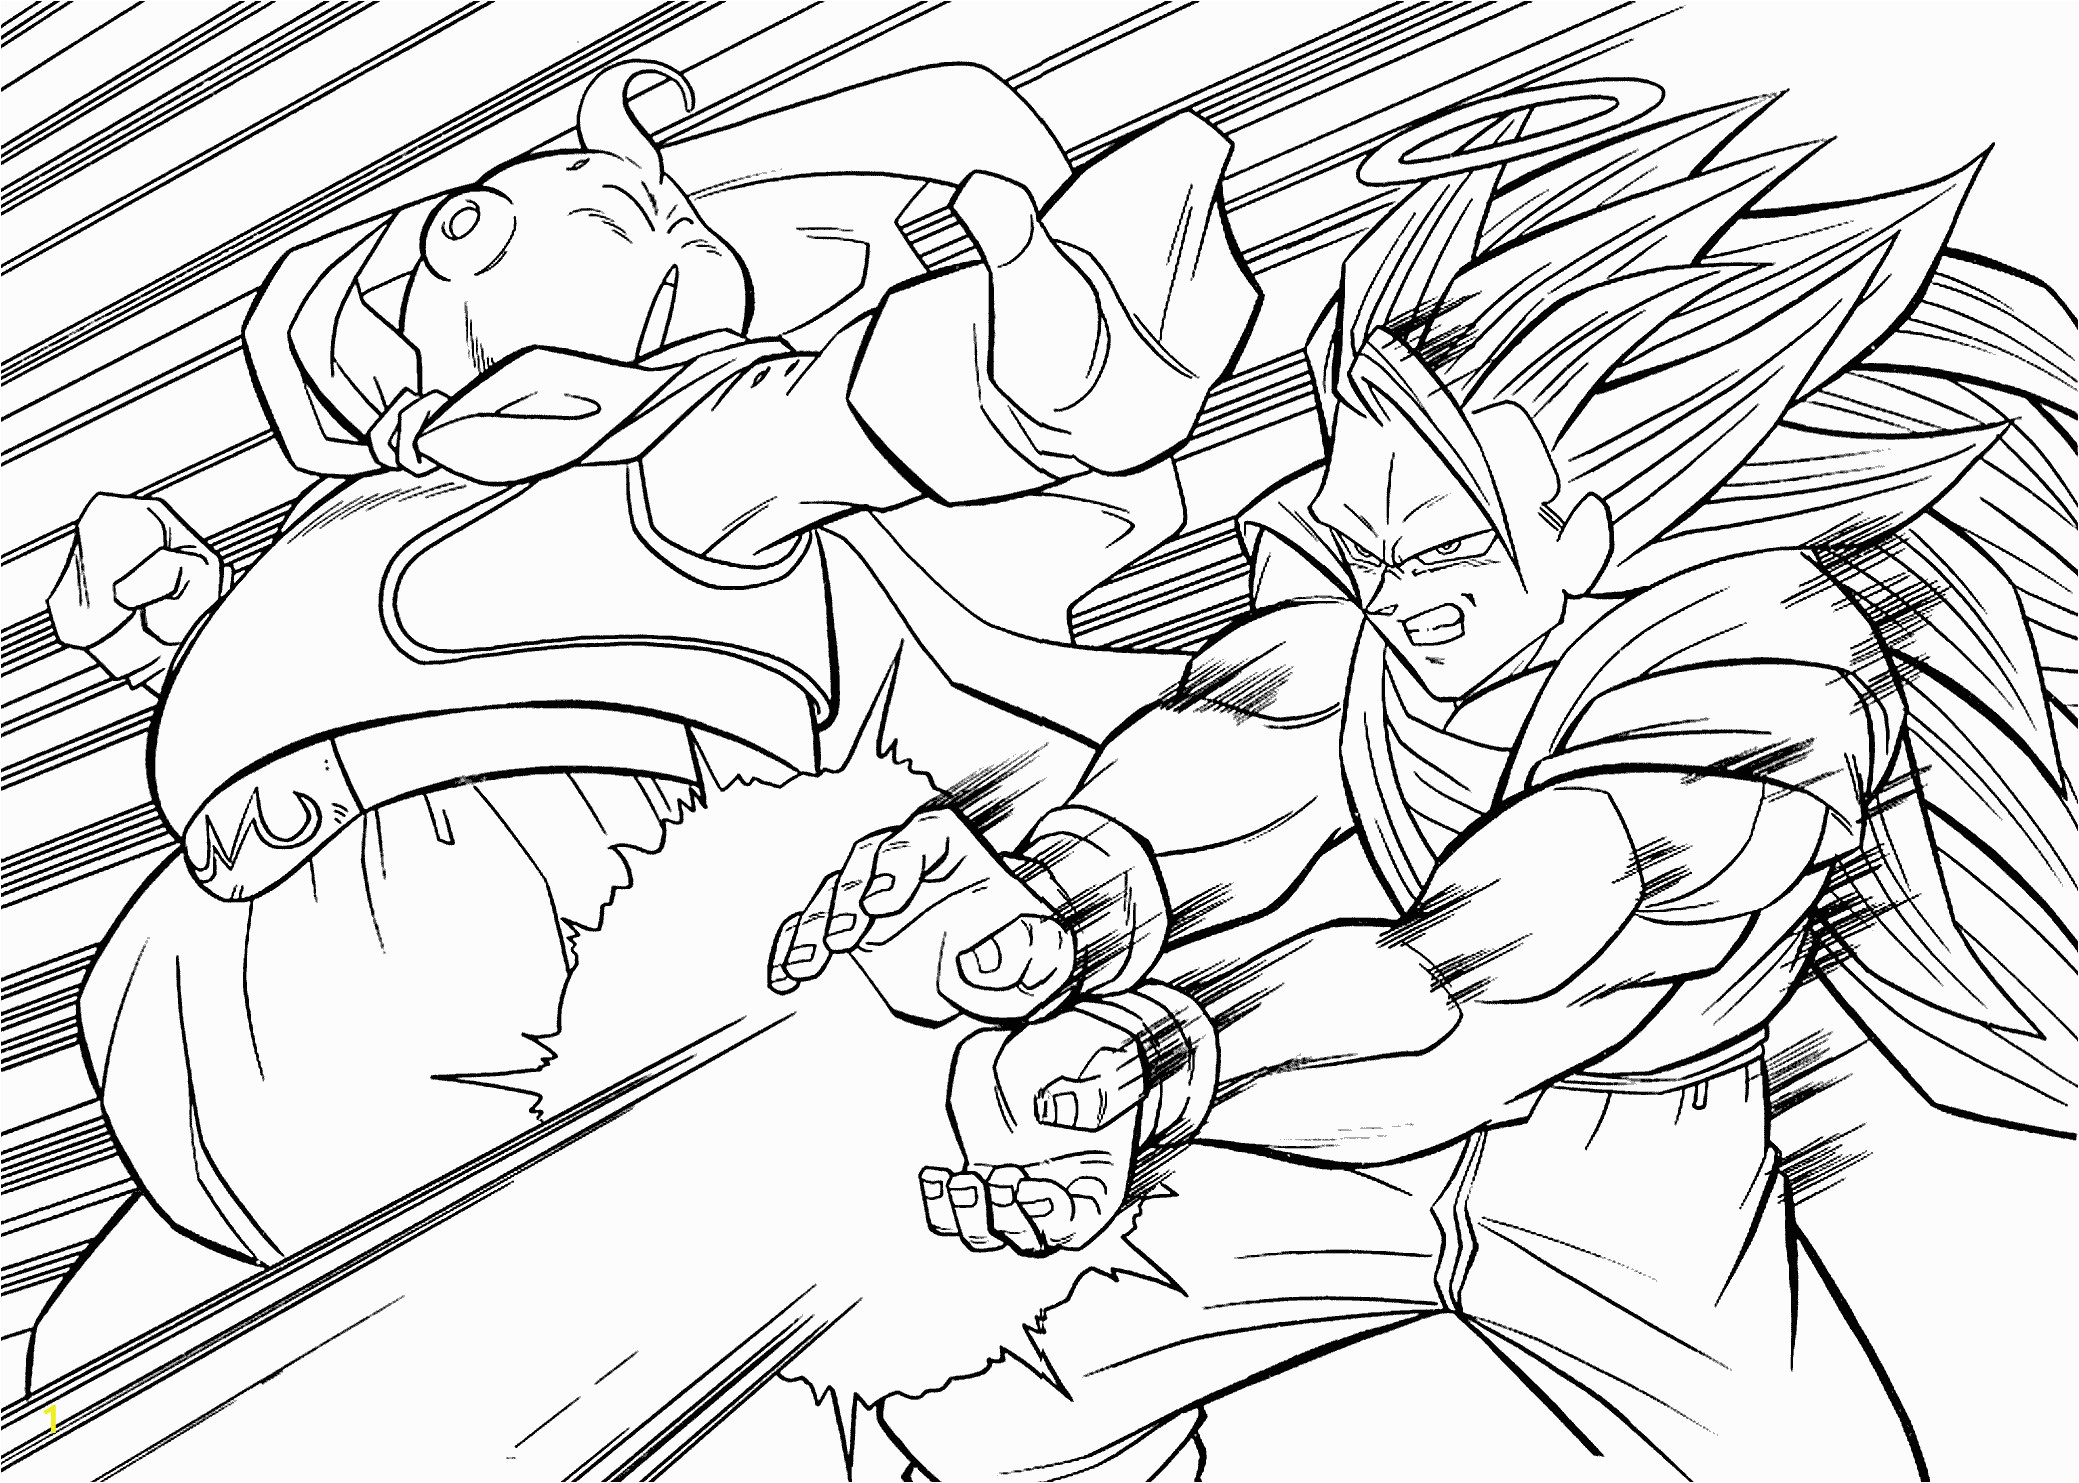 Ssj2 Goku Coloring Pages Dragon Ball Coloring Pages Best Coloring Pages for Kids